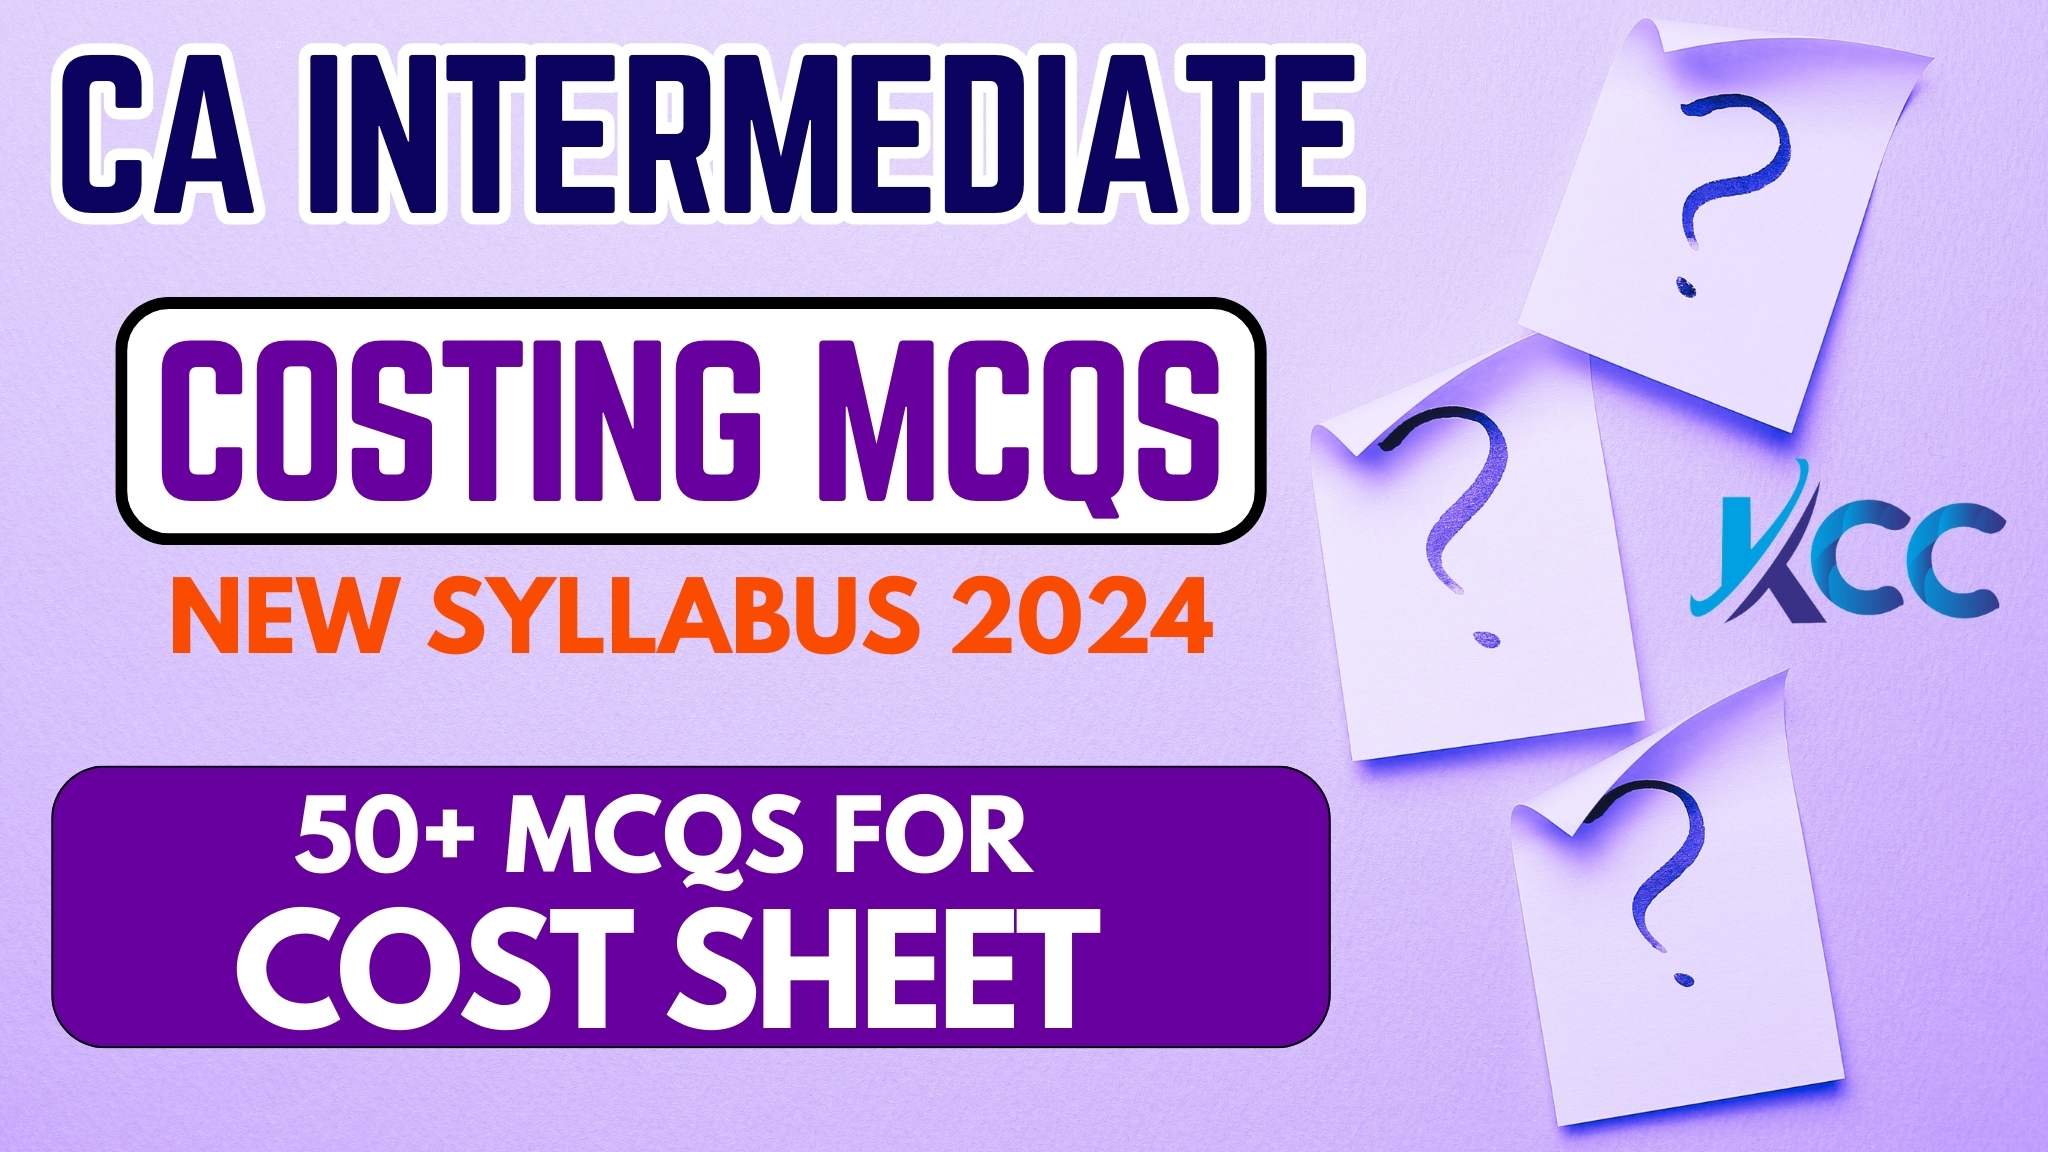 Sandeep Arora Sir at KCC Tutorials provides the best free CA Inter MCQs and Objectives for Costing - Cost Sheet for 2024 New Syllabus